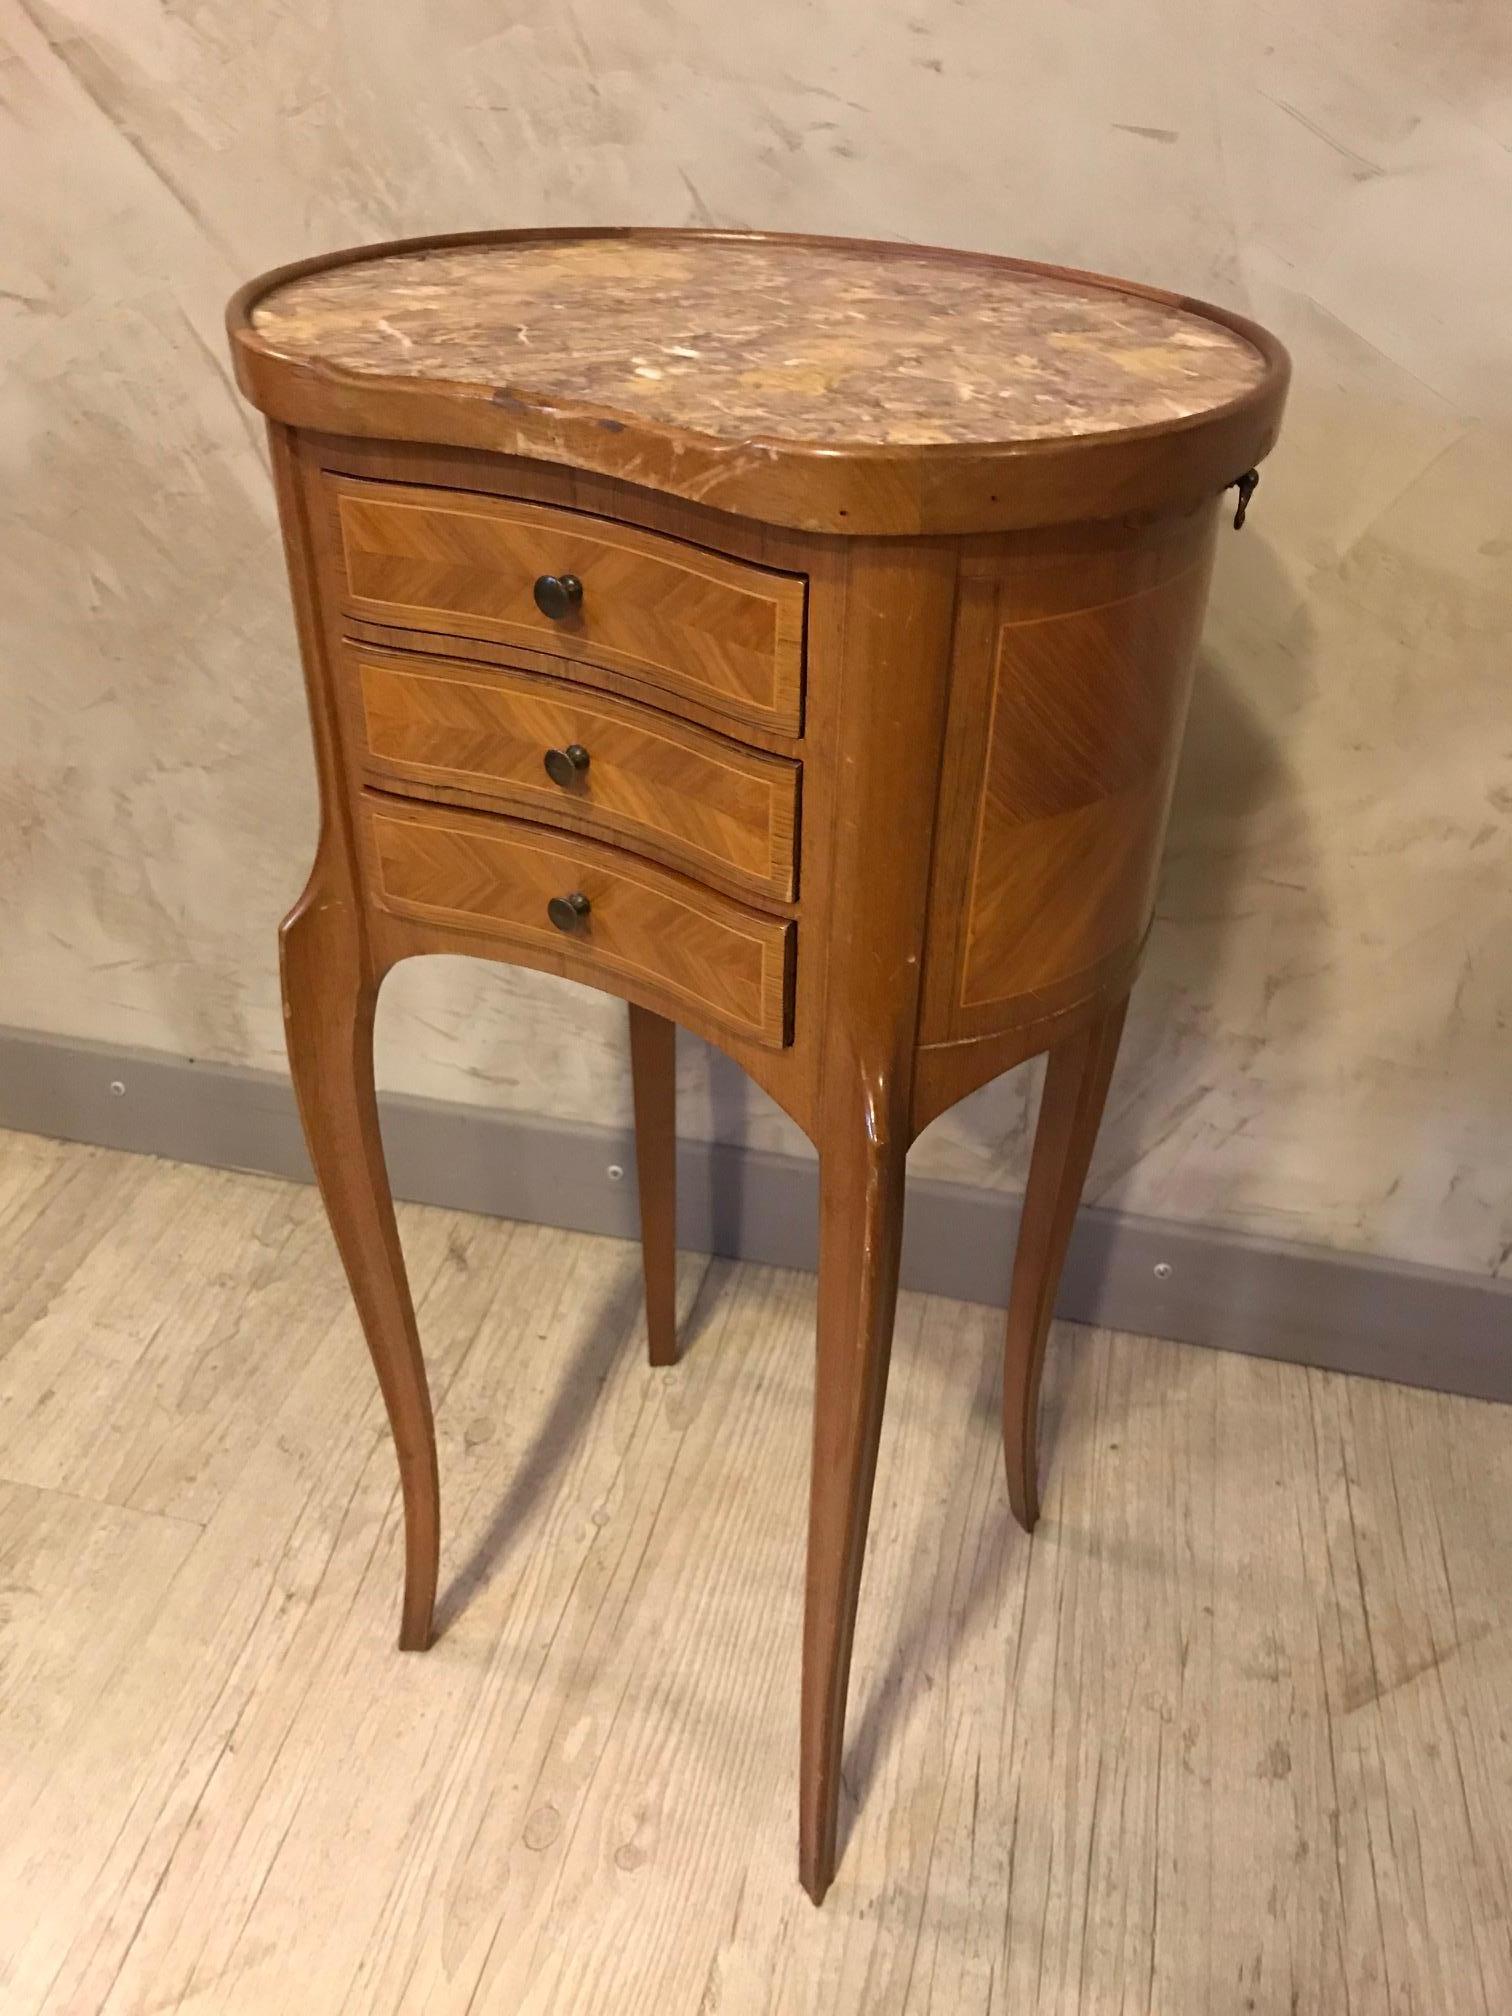 Beautiful small 20th century French Louis XV style walnut and marble bedside table from the 1920s.
Three front drawers and two small tables on the sides.
Very nice marquetry on each sides and at the back. Marble top.
Good general condition but